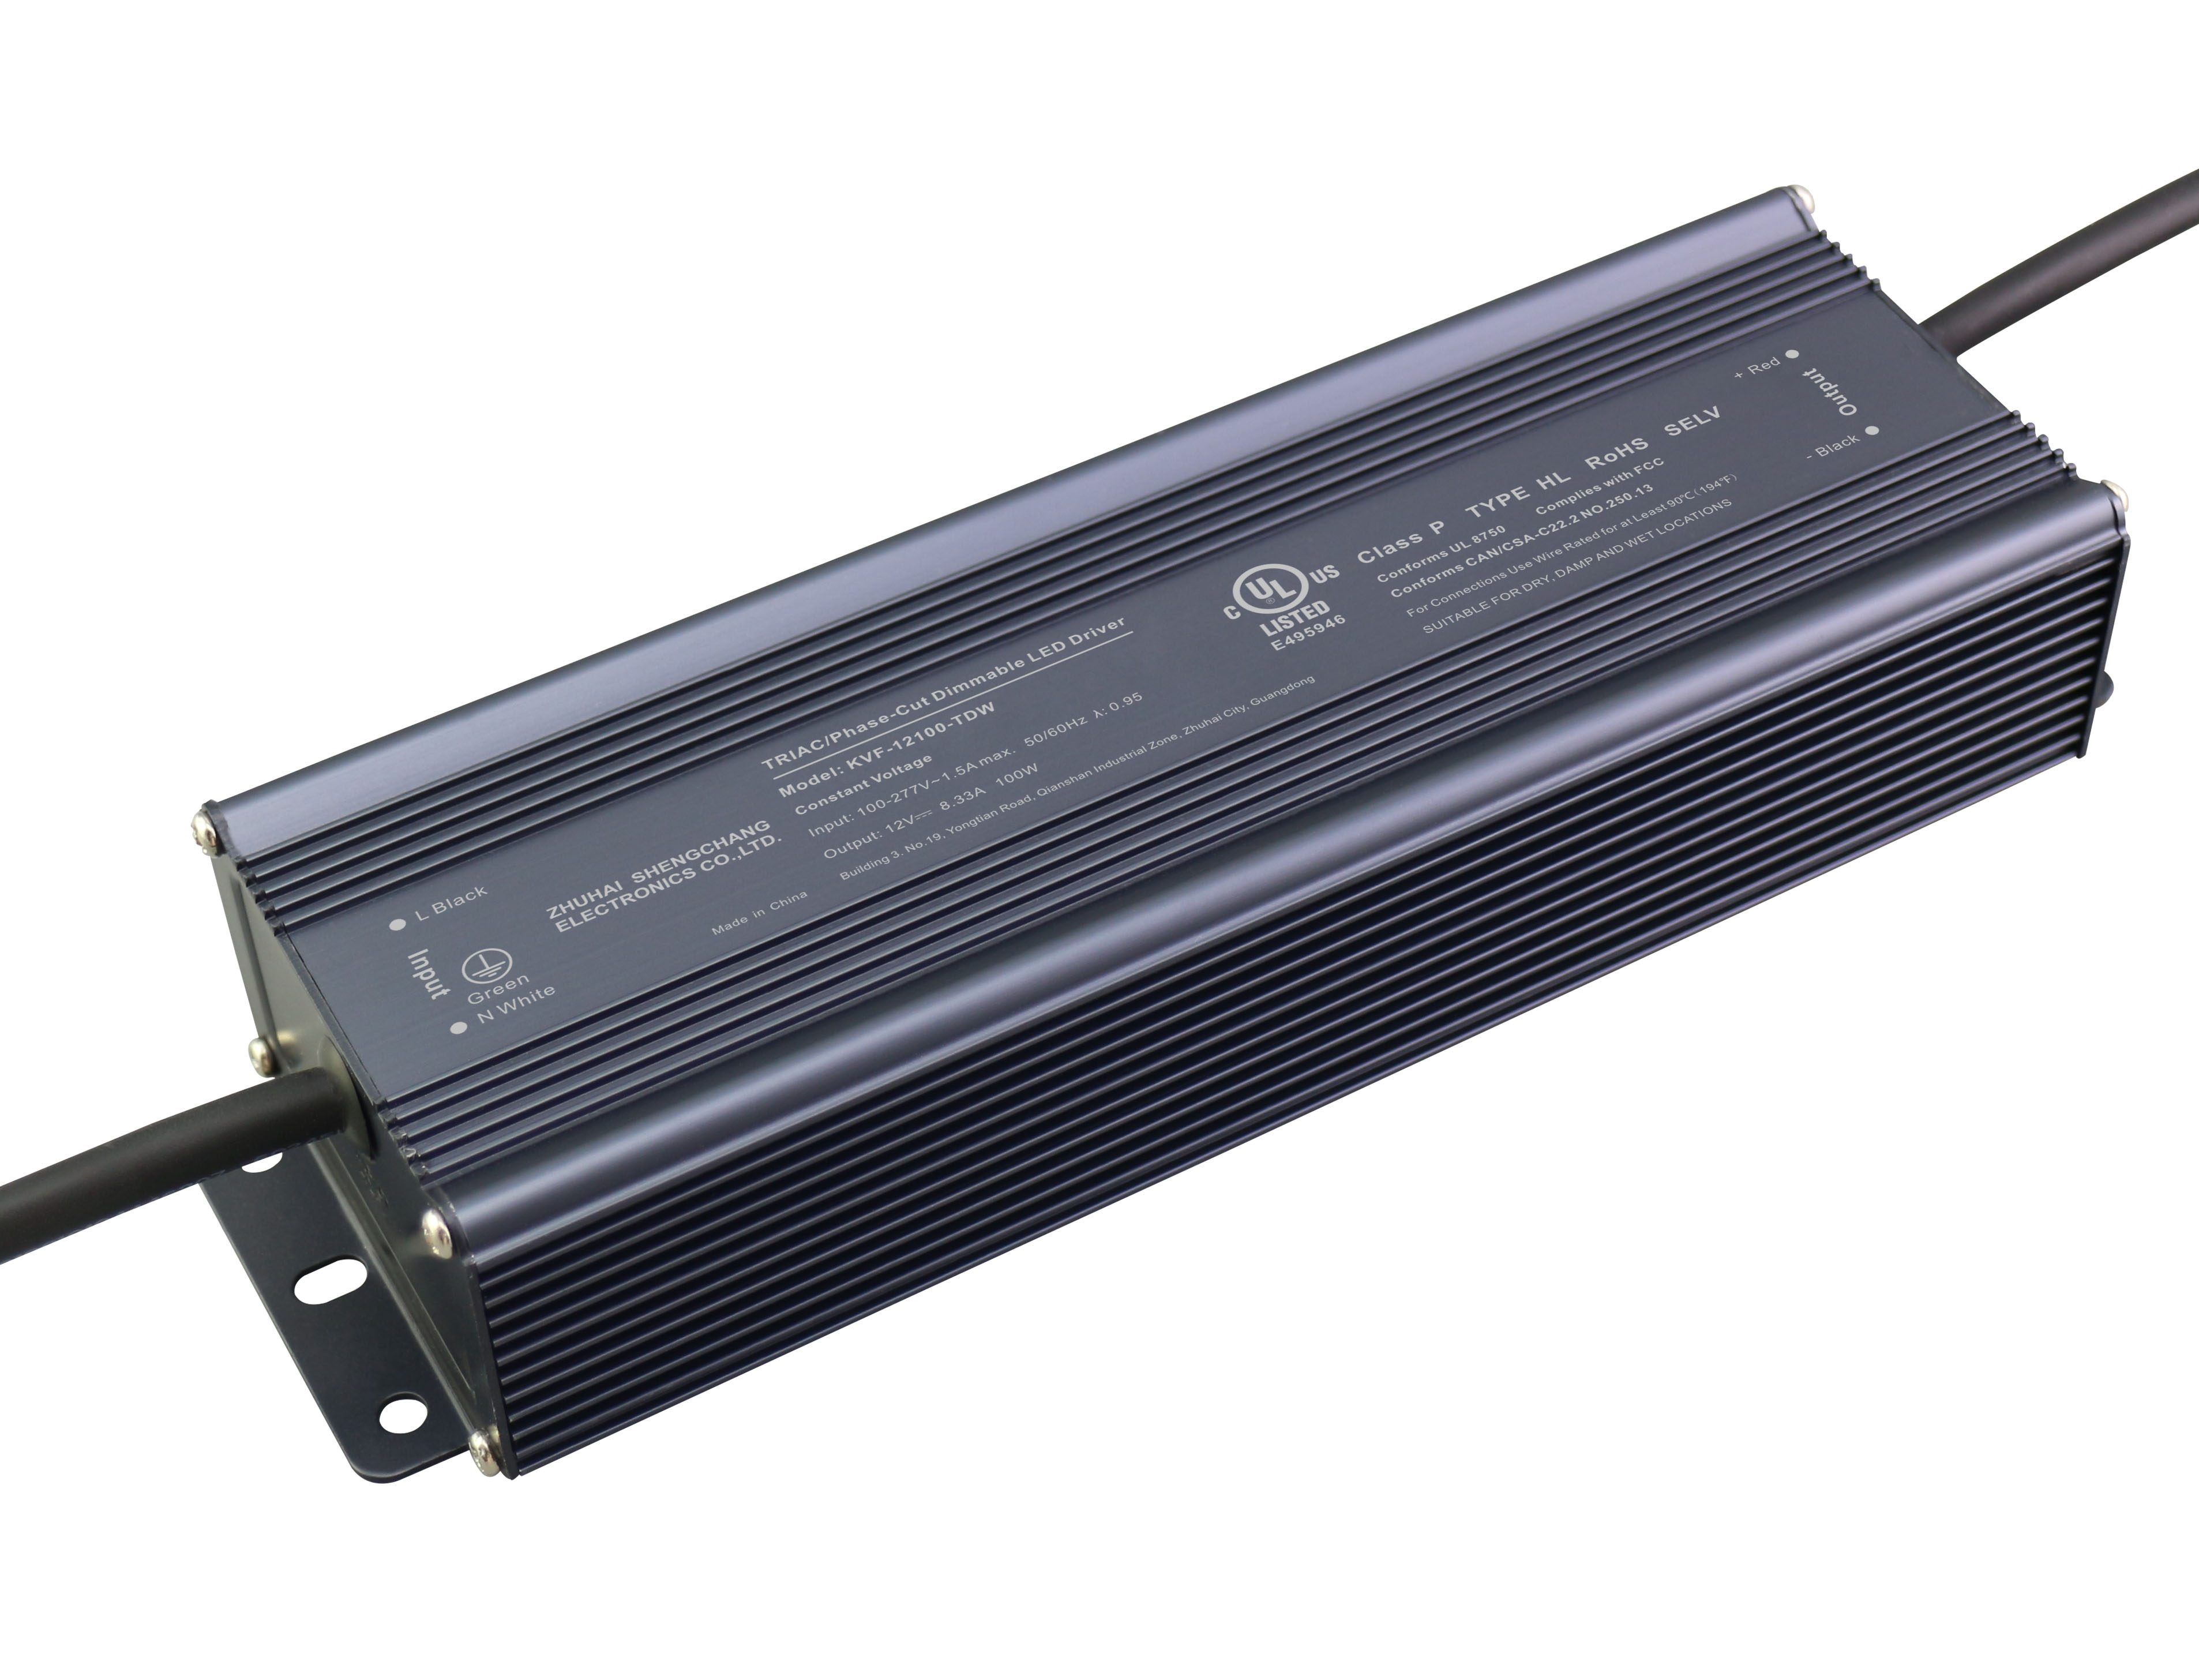 KVF-TDW Series 100W Constant Voltage Triac Dimmable LED driver